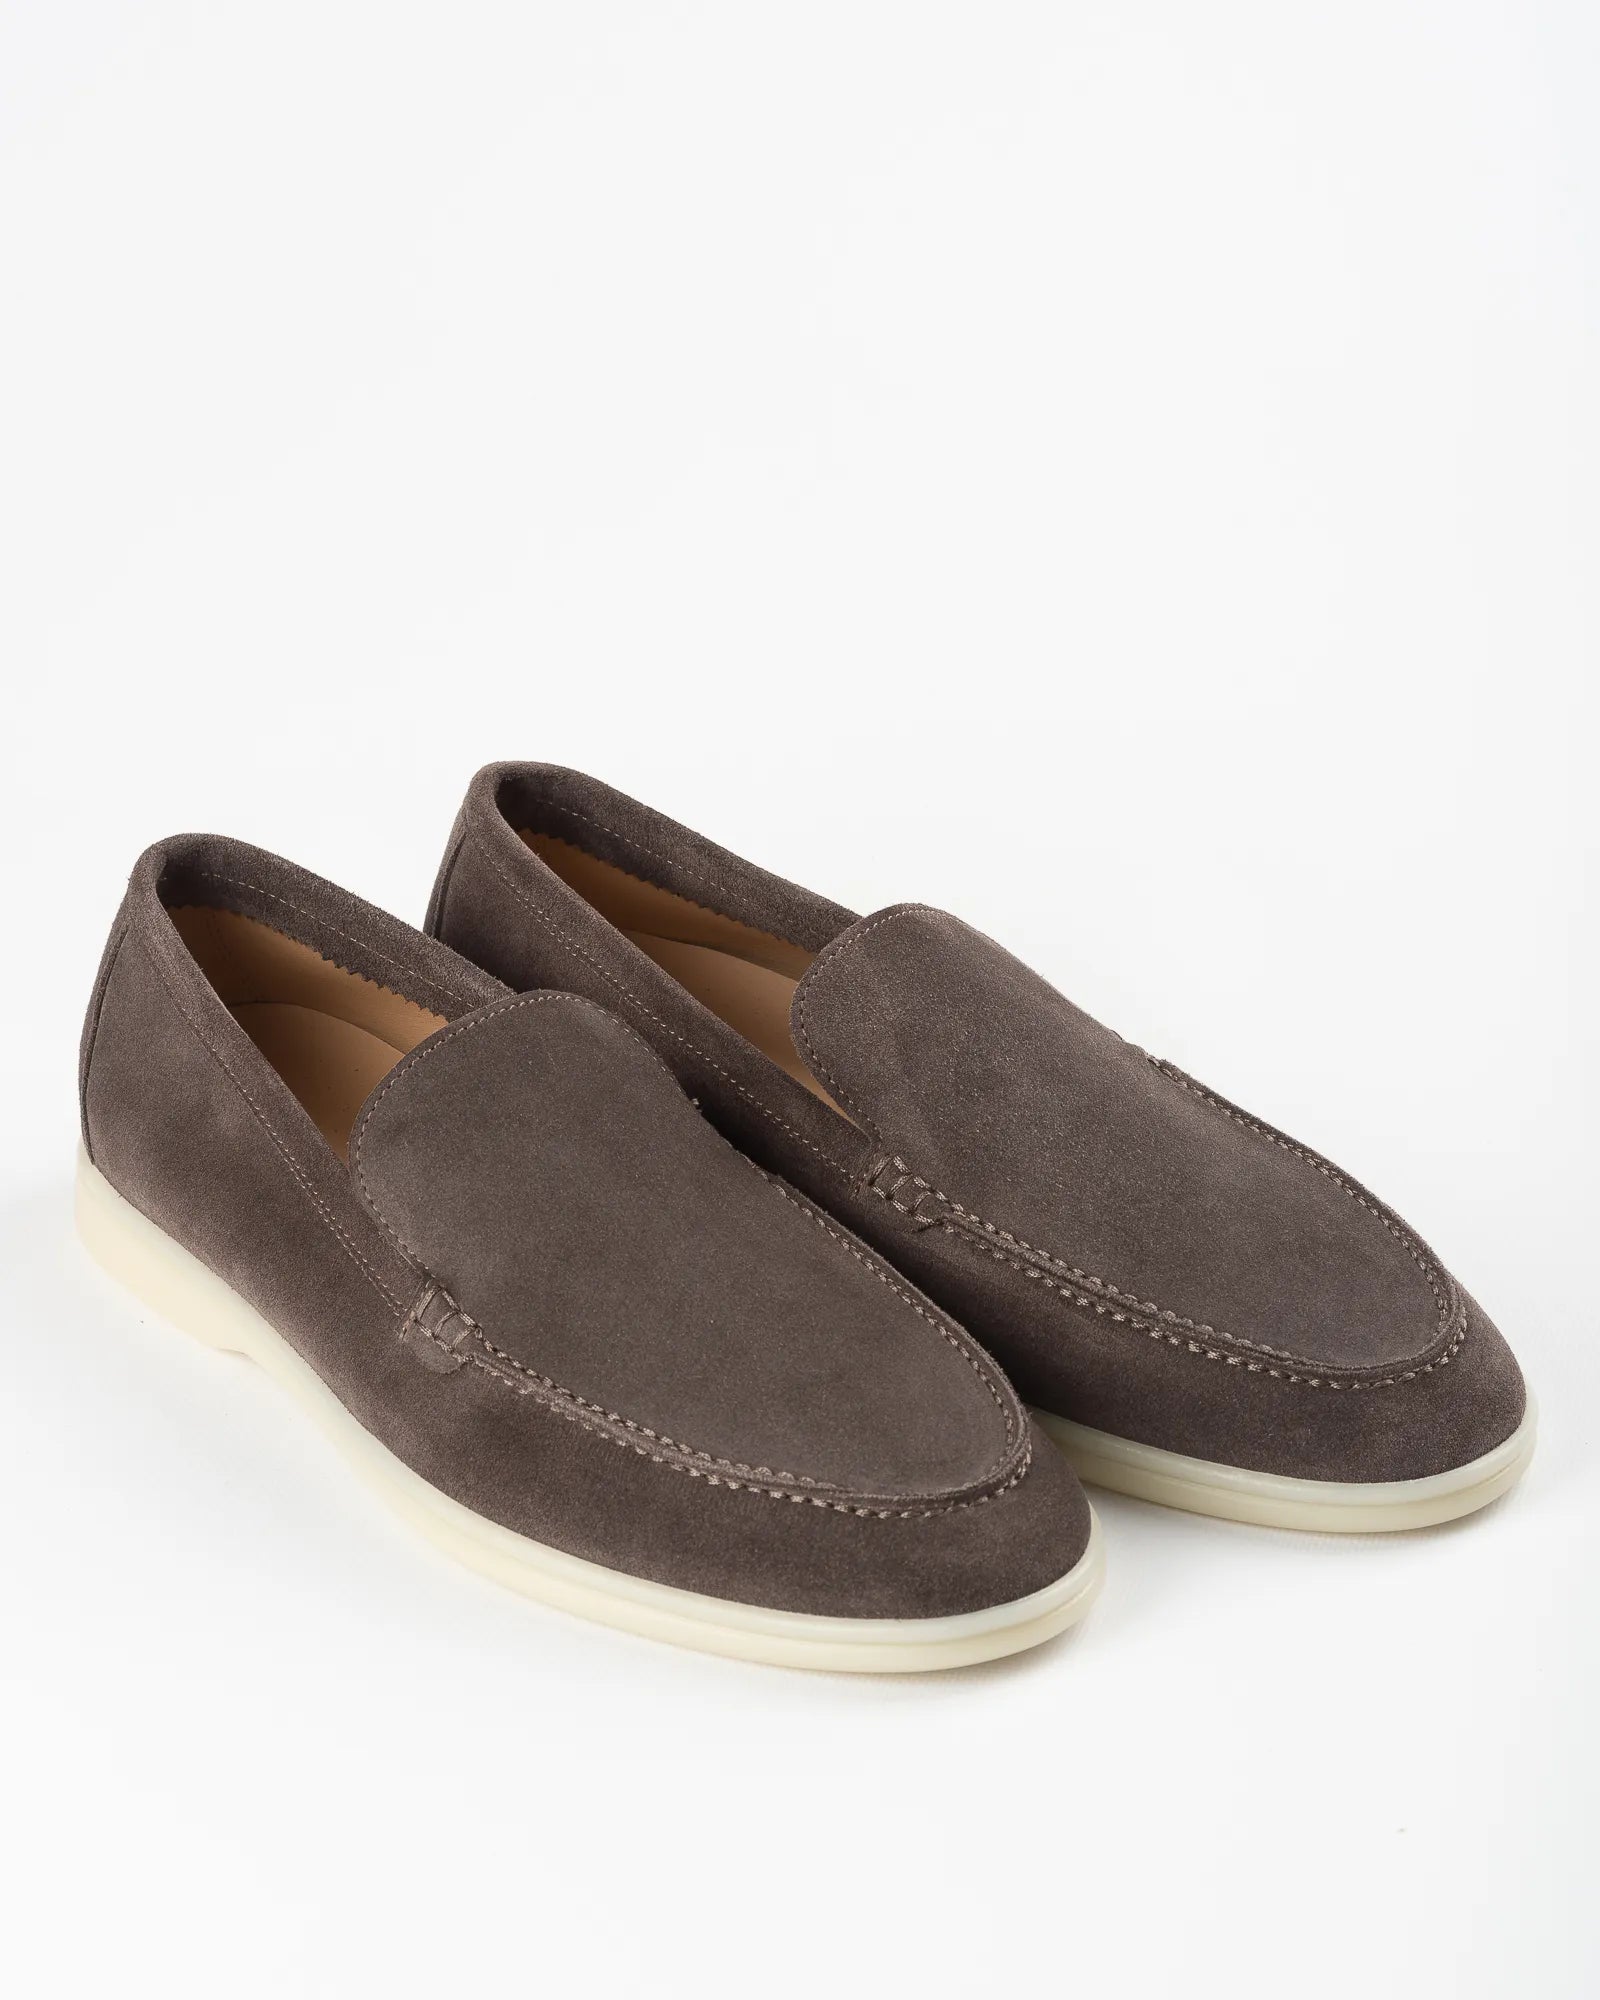 Men's Genuine Suede Loafers Moccasins Chocolate